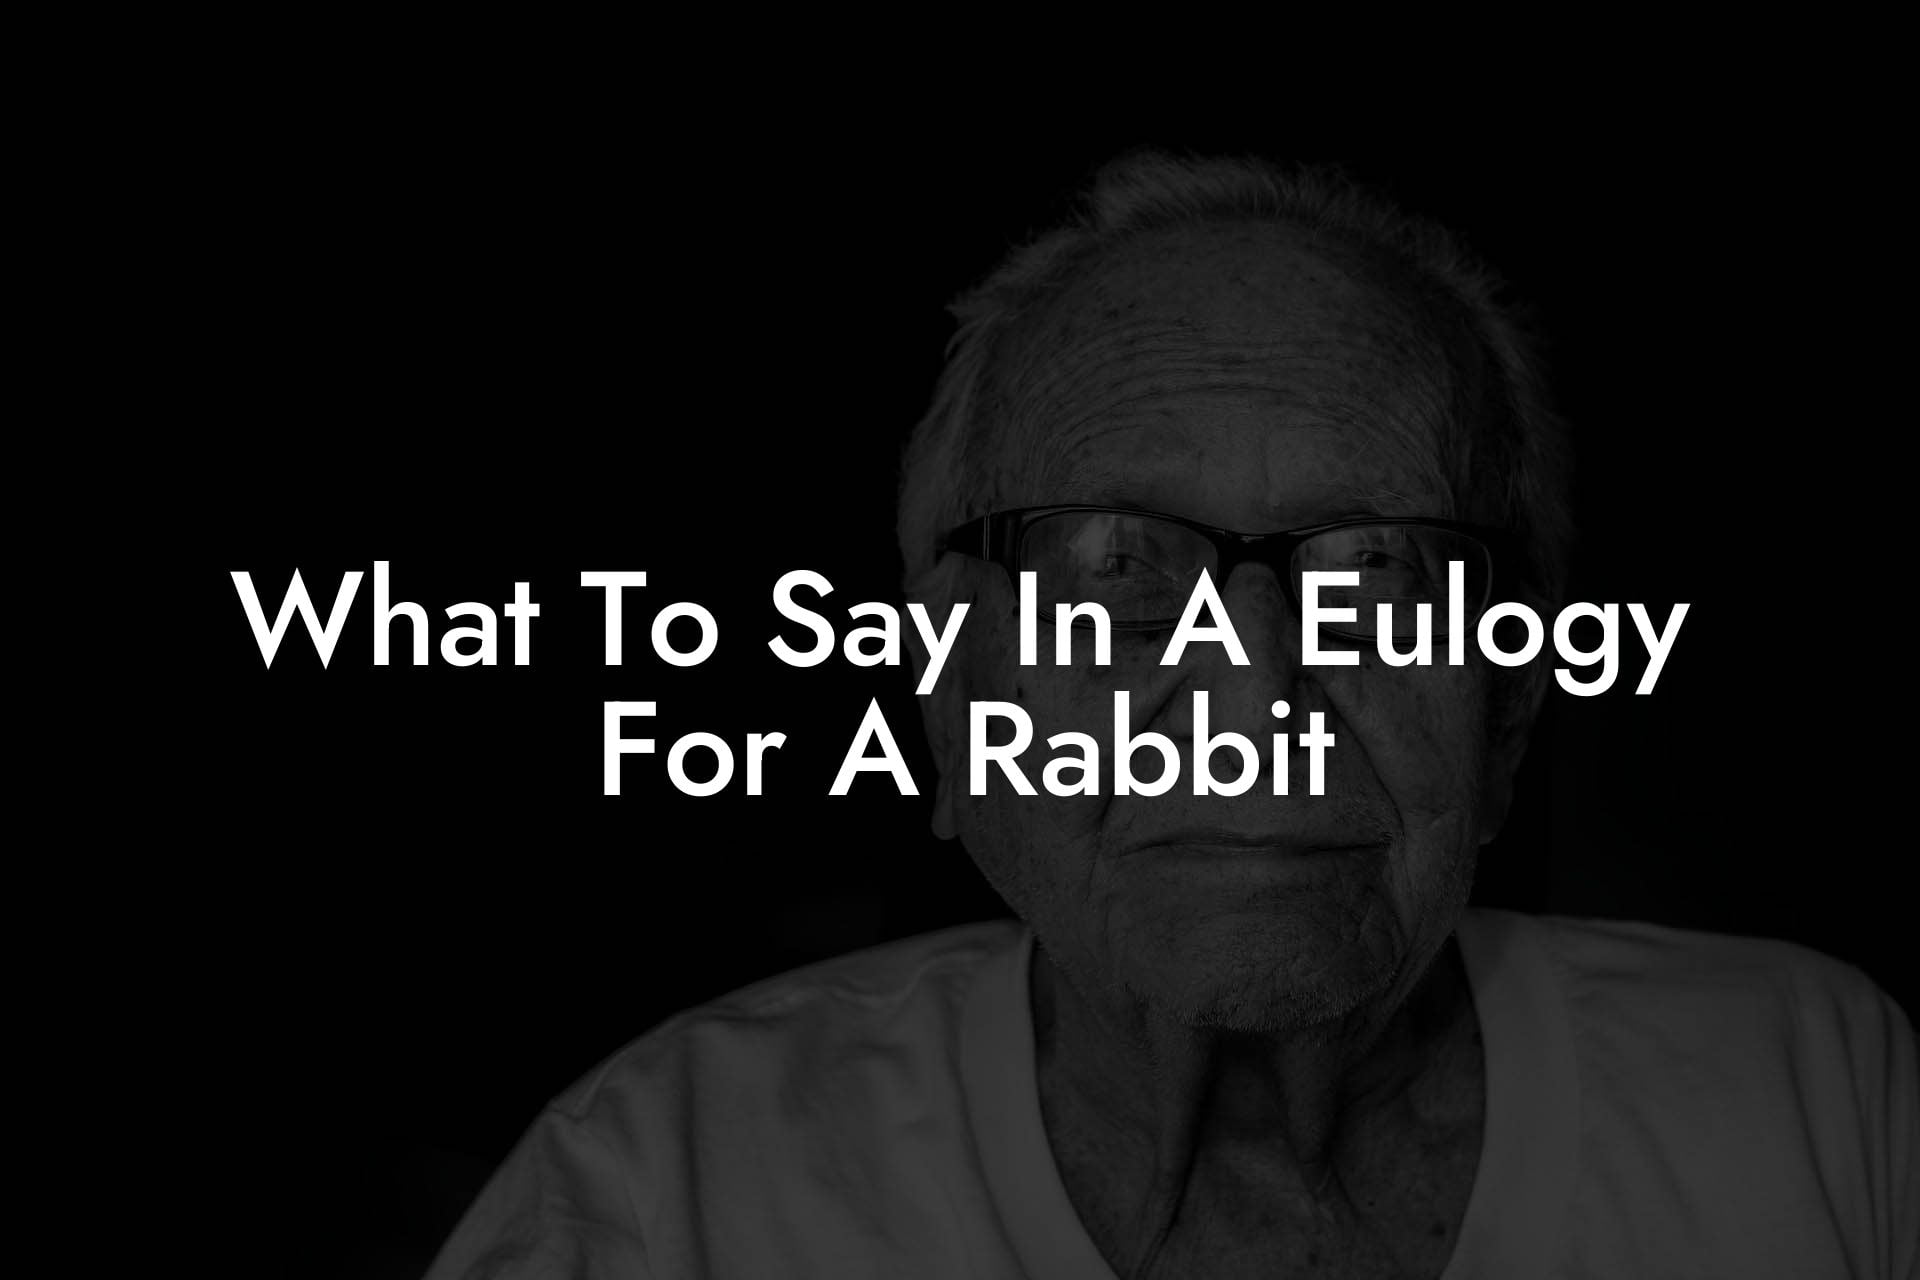 What To Say In A Eulogy For A Rabbit